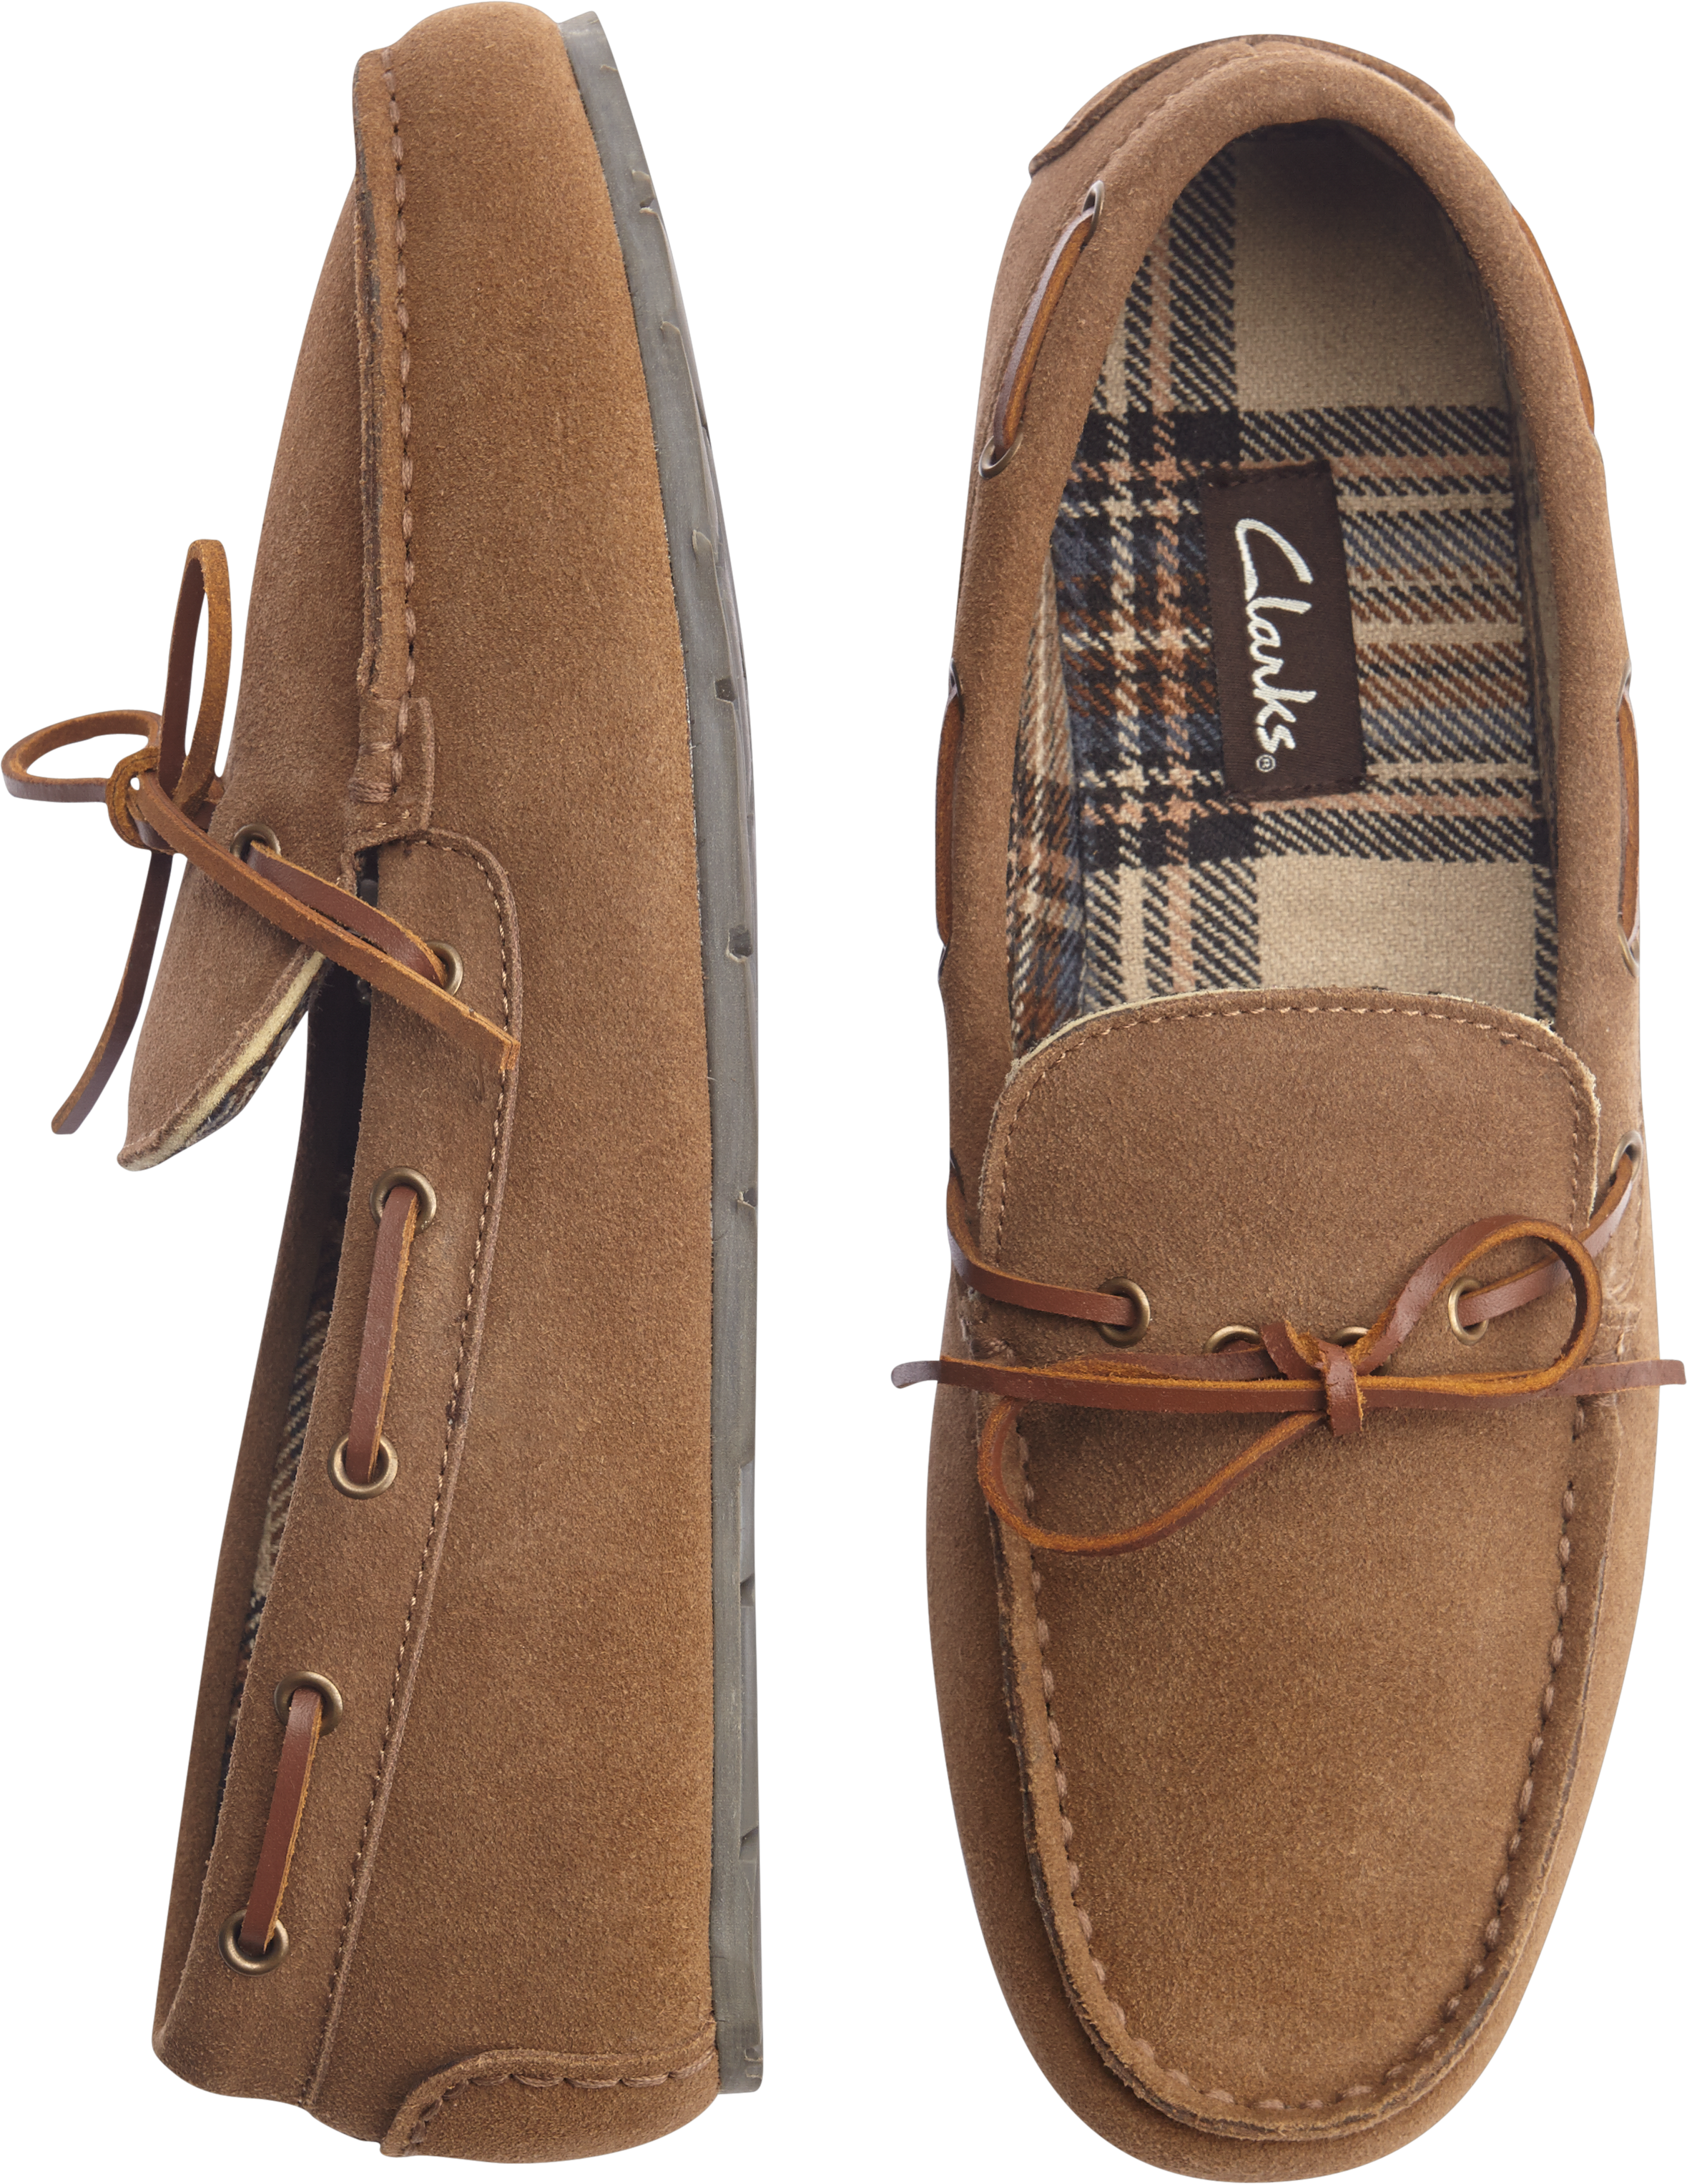 clarks mens moccasin slippers